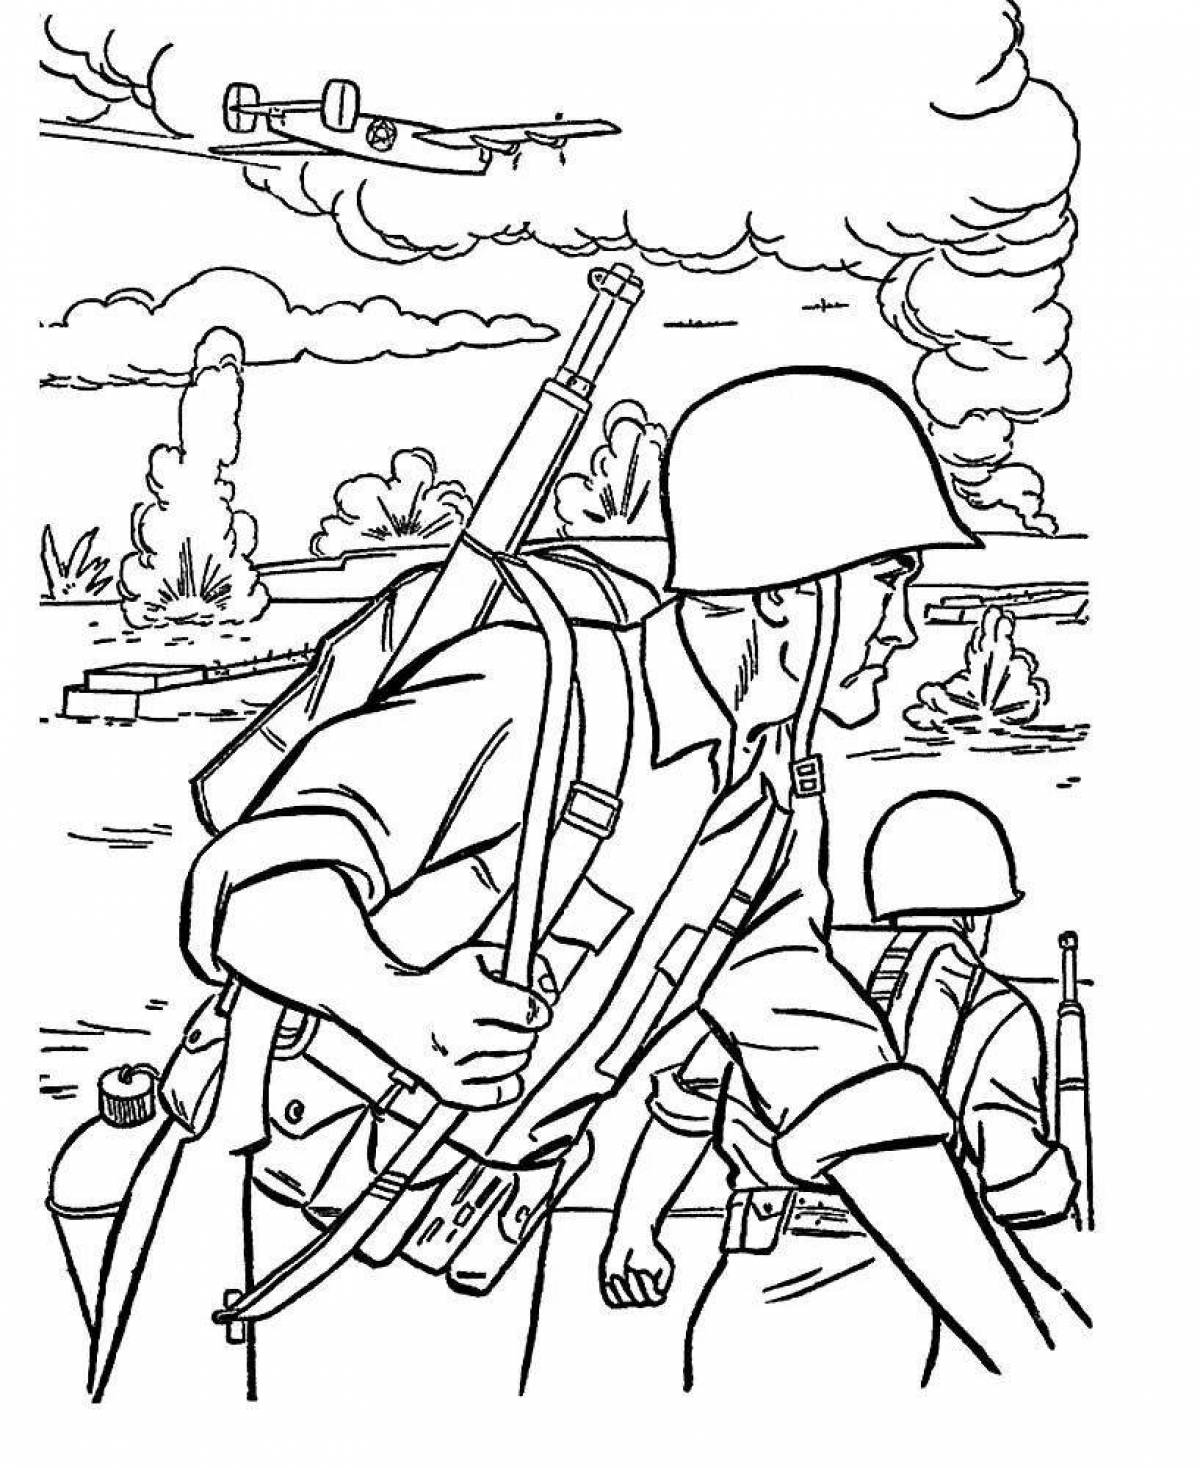 Great world war 2 coloring book